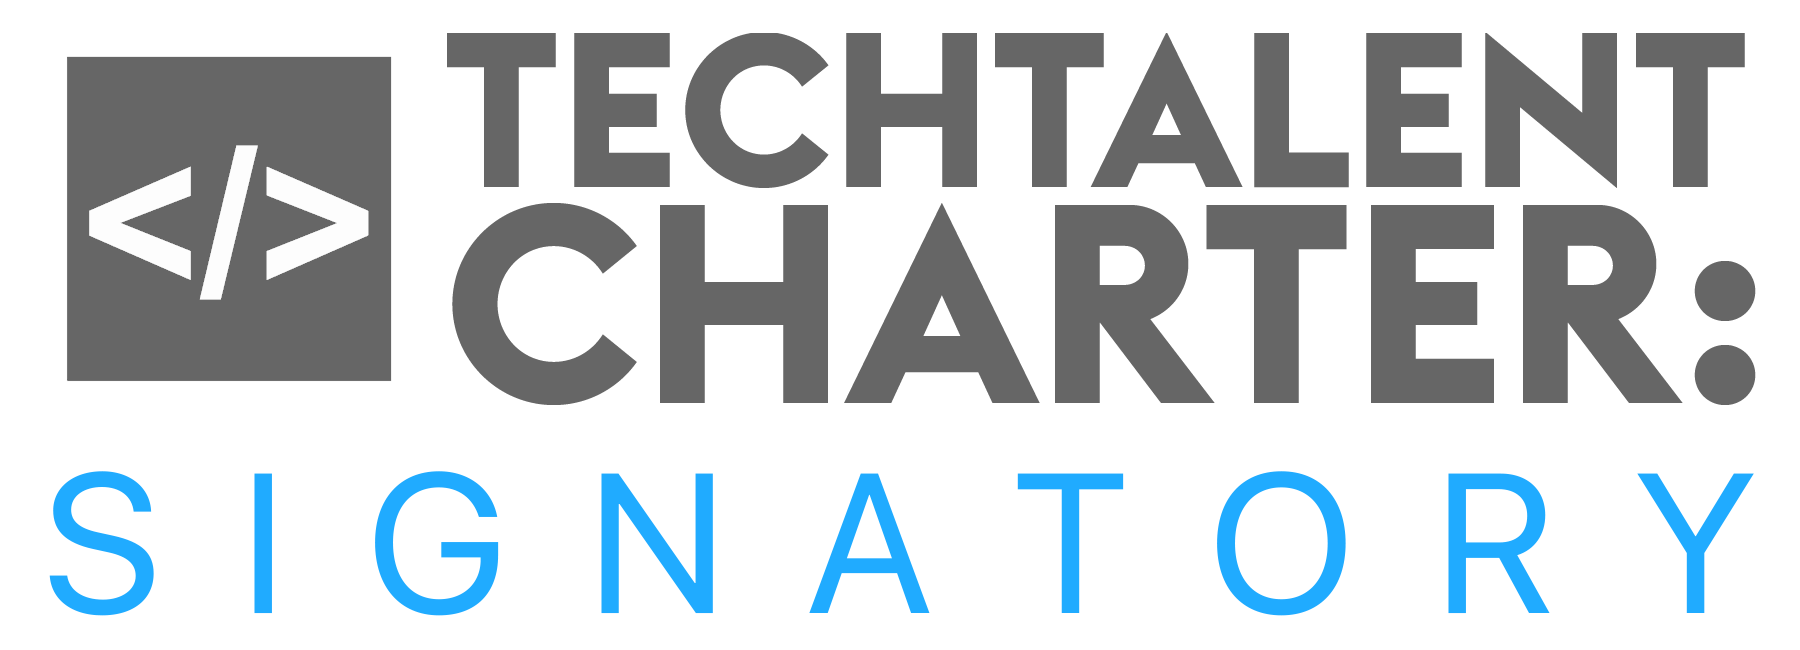 We're a signatory to the Tech Talent Charter